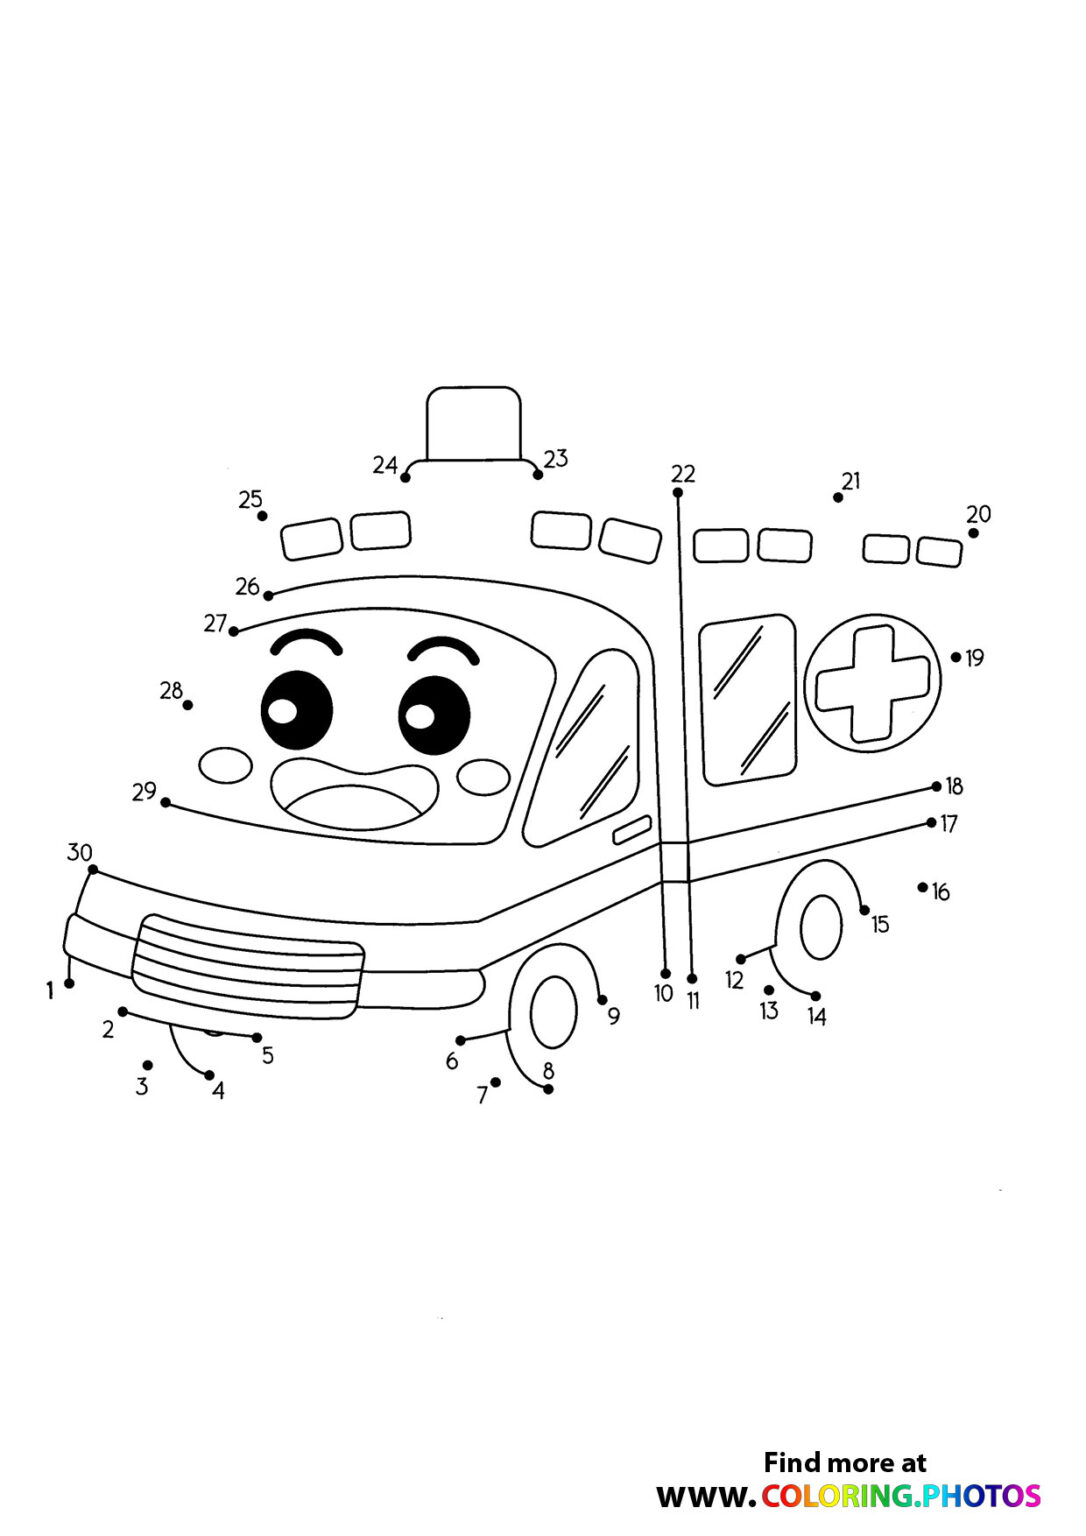 Ambulance dot to dot worksheet - Coloring Pages for kids | Free and